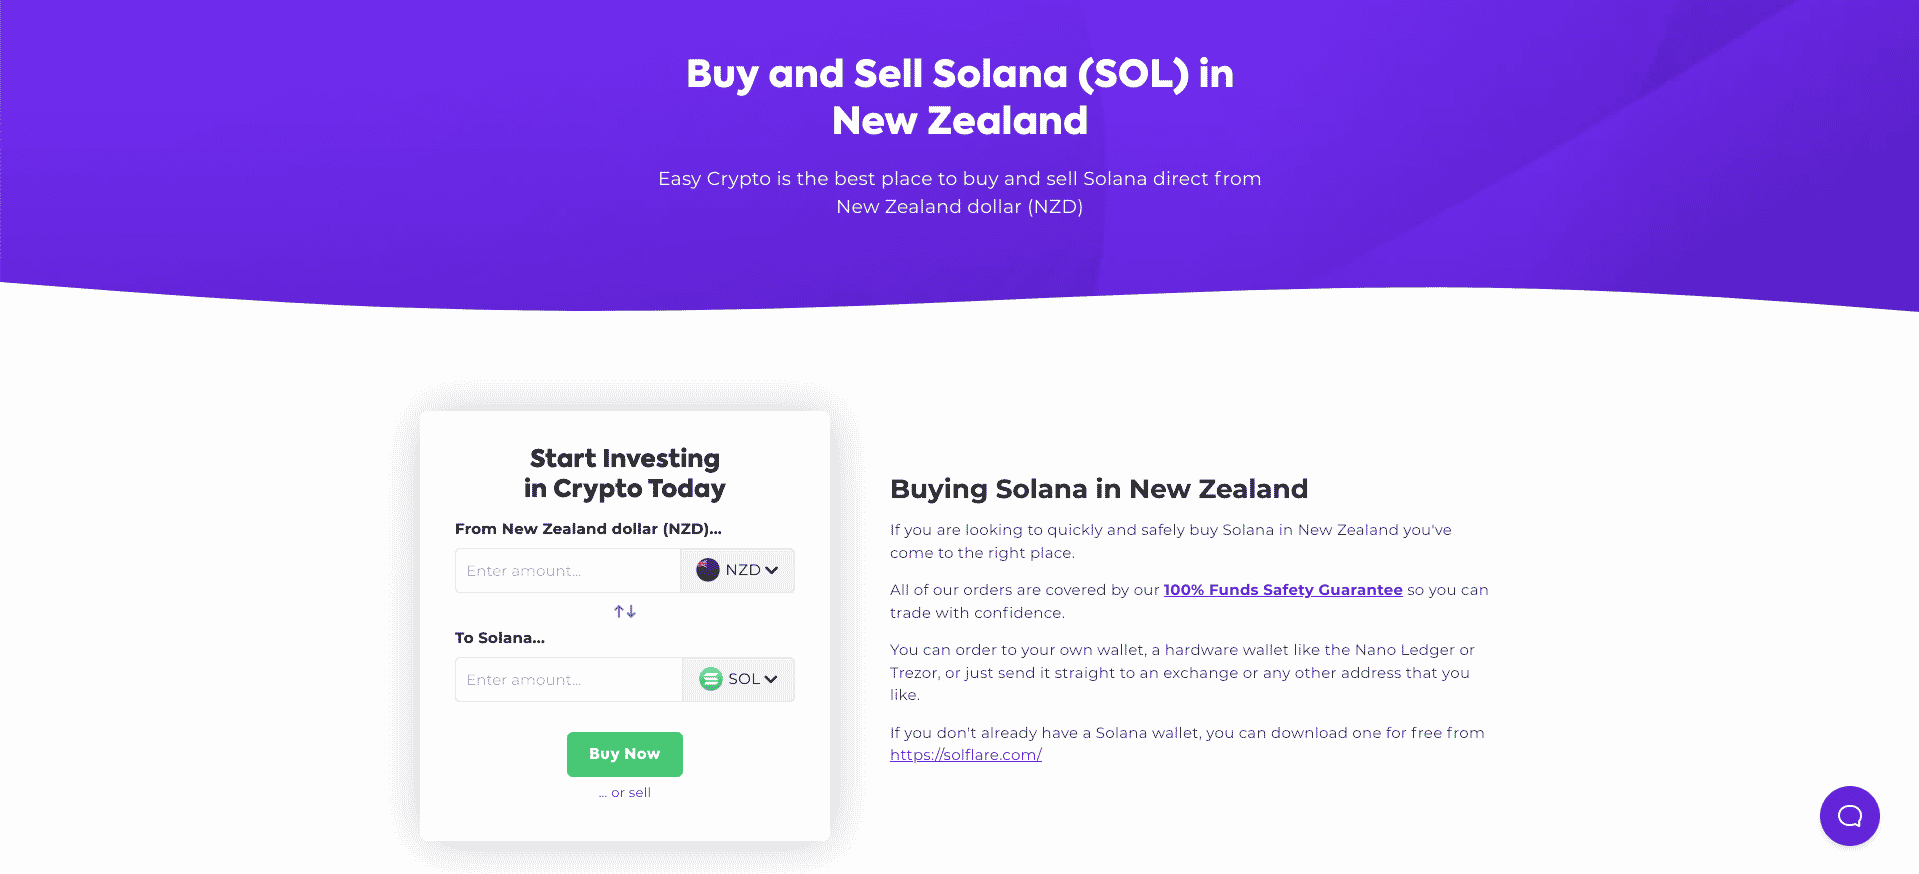 Buy and Sell Solana with Easy Crypto